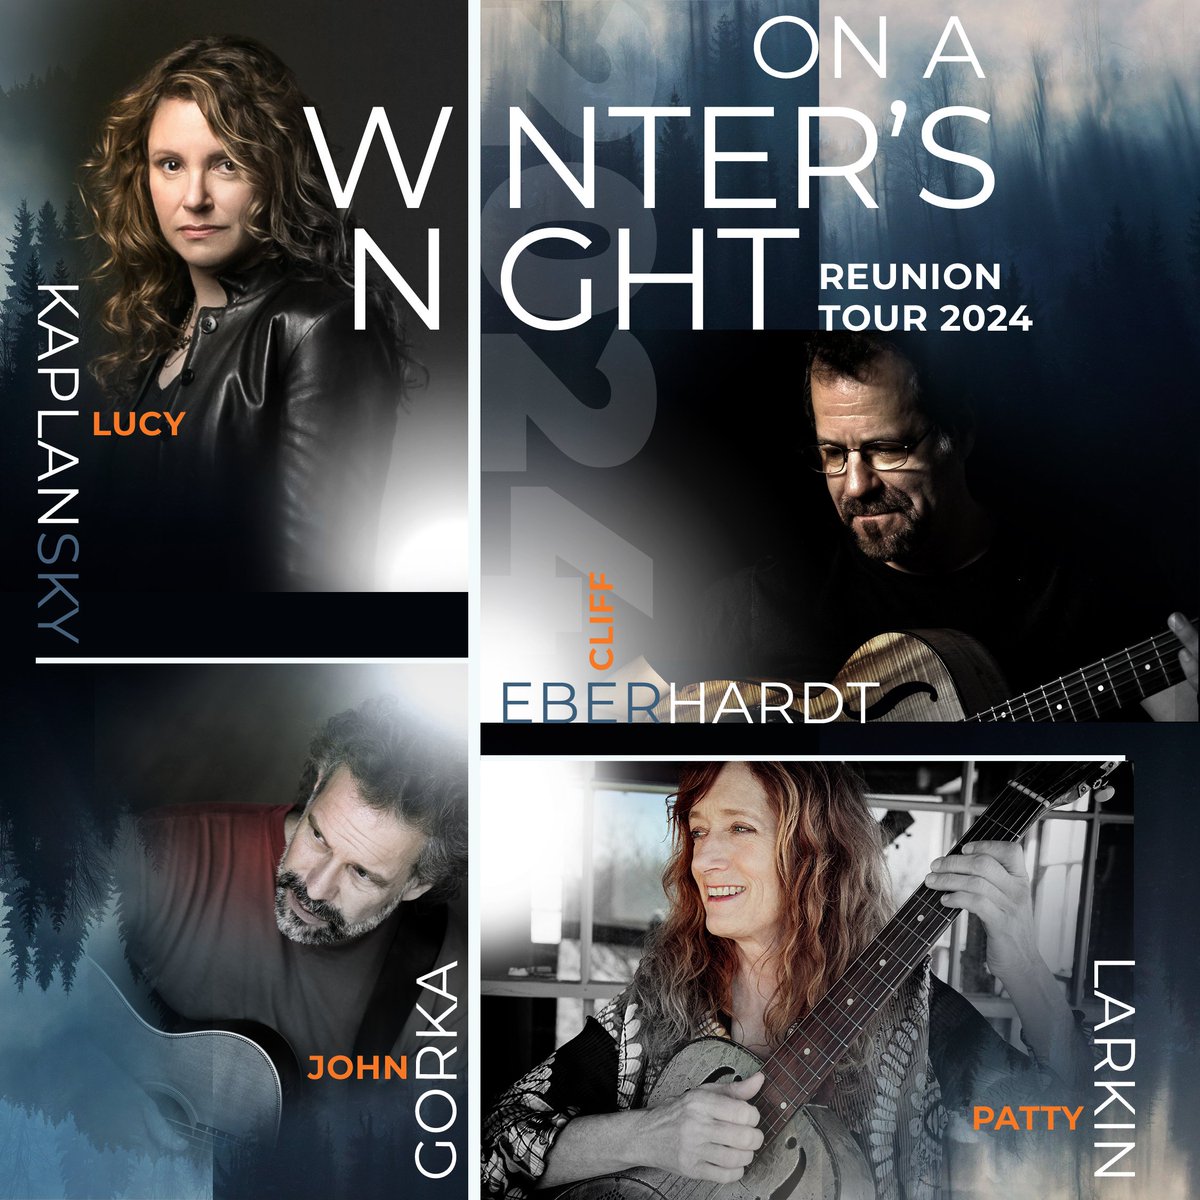 Cliff Eberhardt, @johngorka, @lucykaplansky & @PattyLarkin are on the road with the On A Winter's Night Reunion Tour & they'll be at @TheParkwayMPLS Sun., Feb. 18th. We have a pair of tickets to give away! RT to ETW & we'll pick a winner Thurs. at noon. theparkwaytheater.com/all-events/on-…